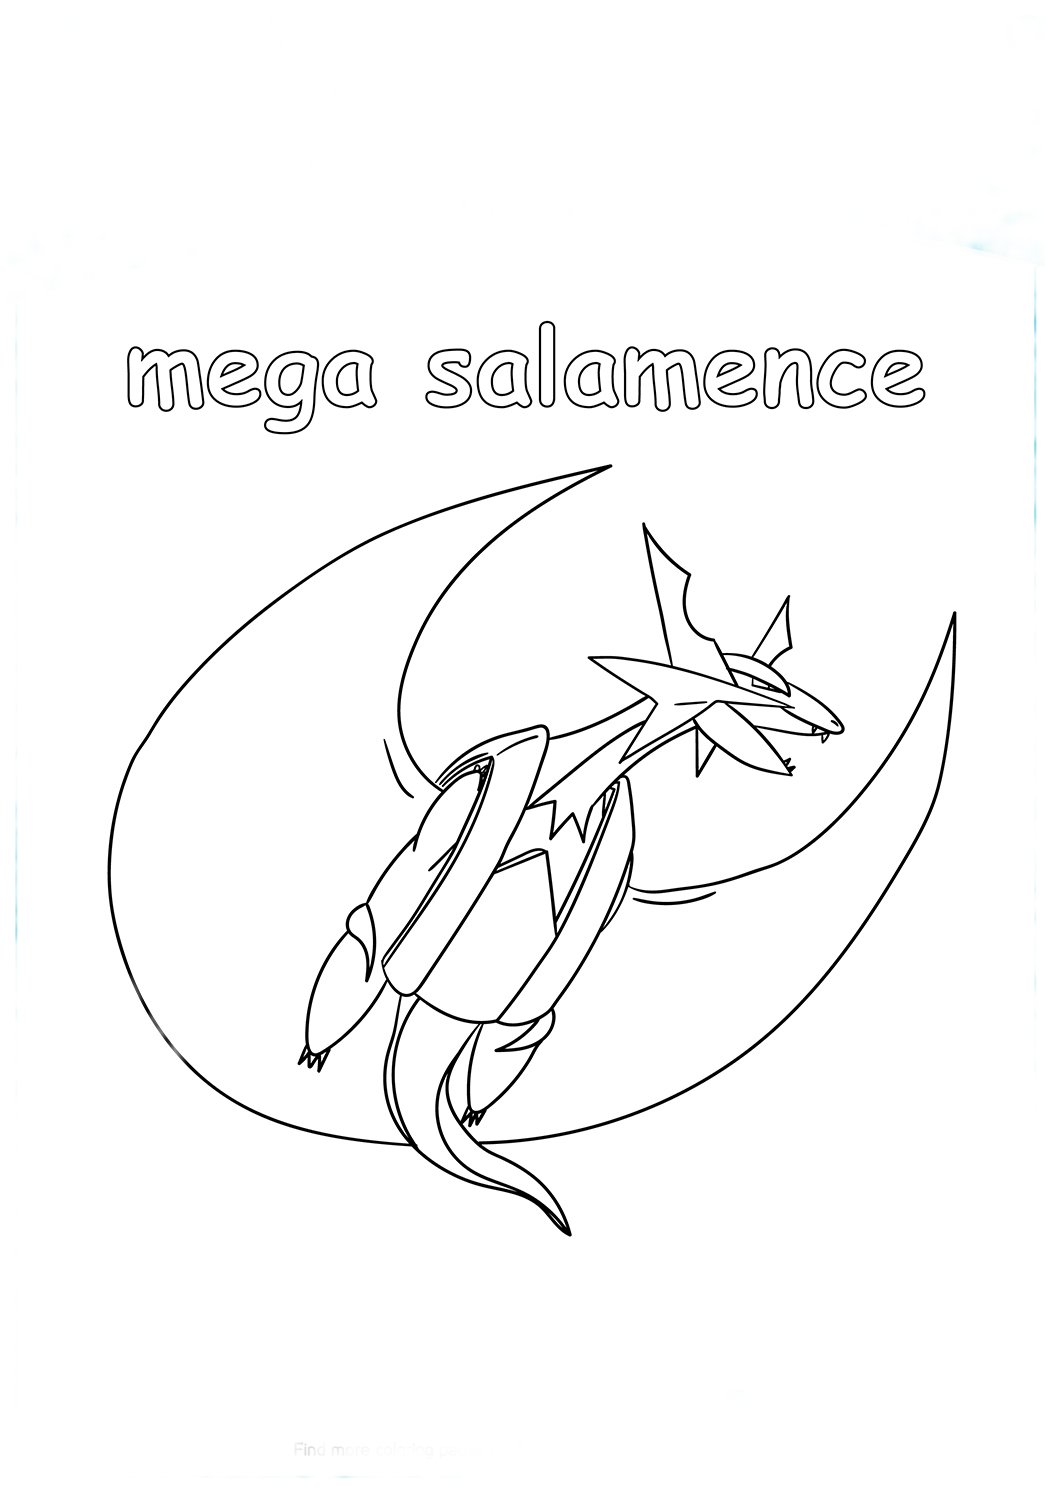 Mega Salamence Coloring Page - Free Printable Coloring Pages for Kids